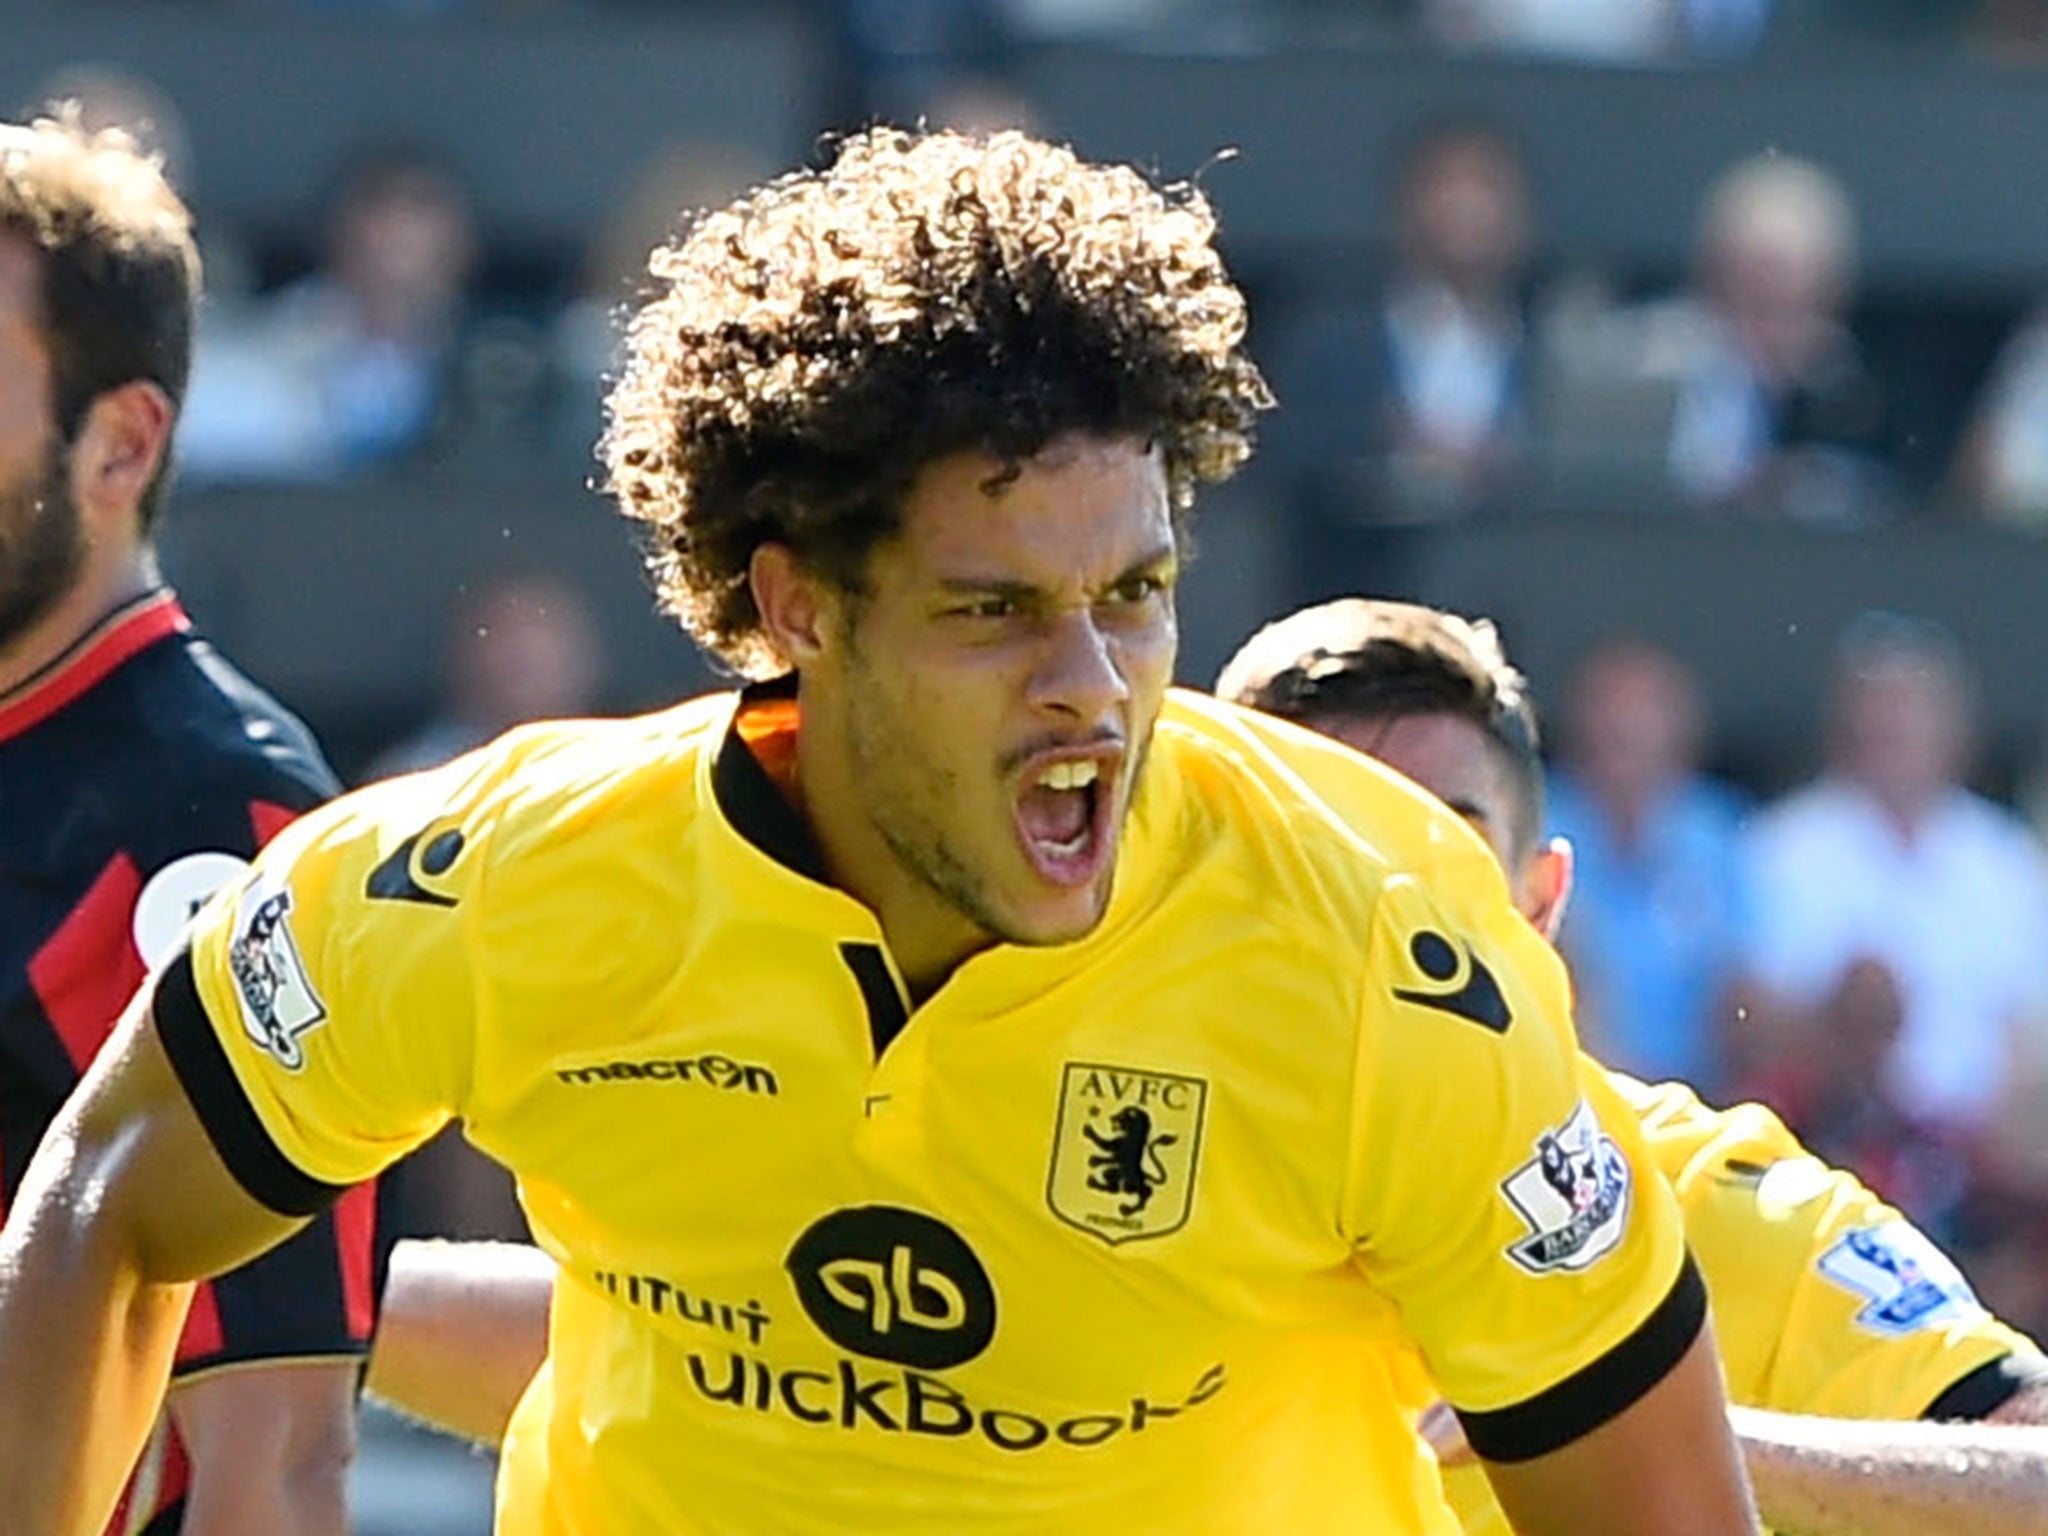 Rudy Gestede scored the only goal in Aston Villa’s 1-0 victory over promoted Bournemouth